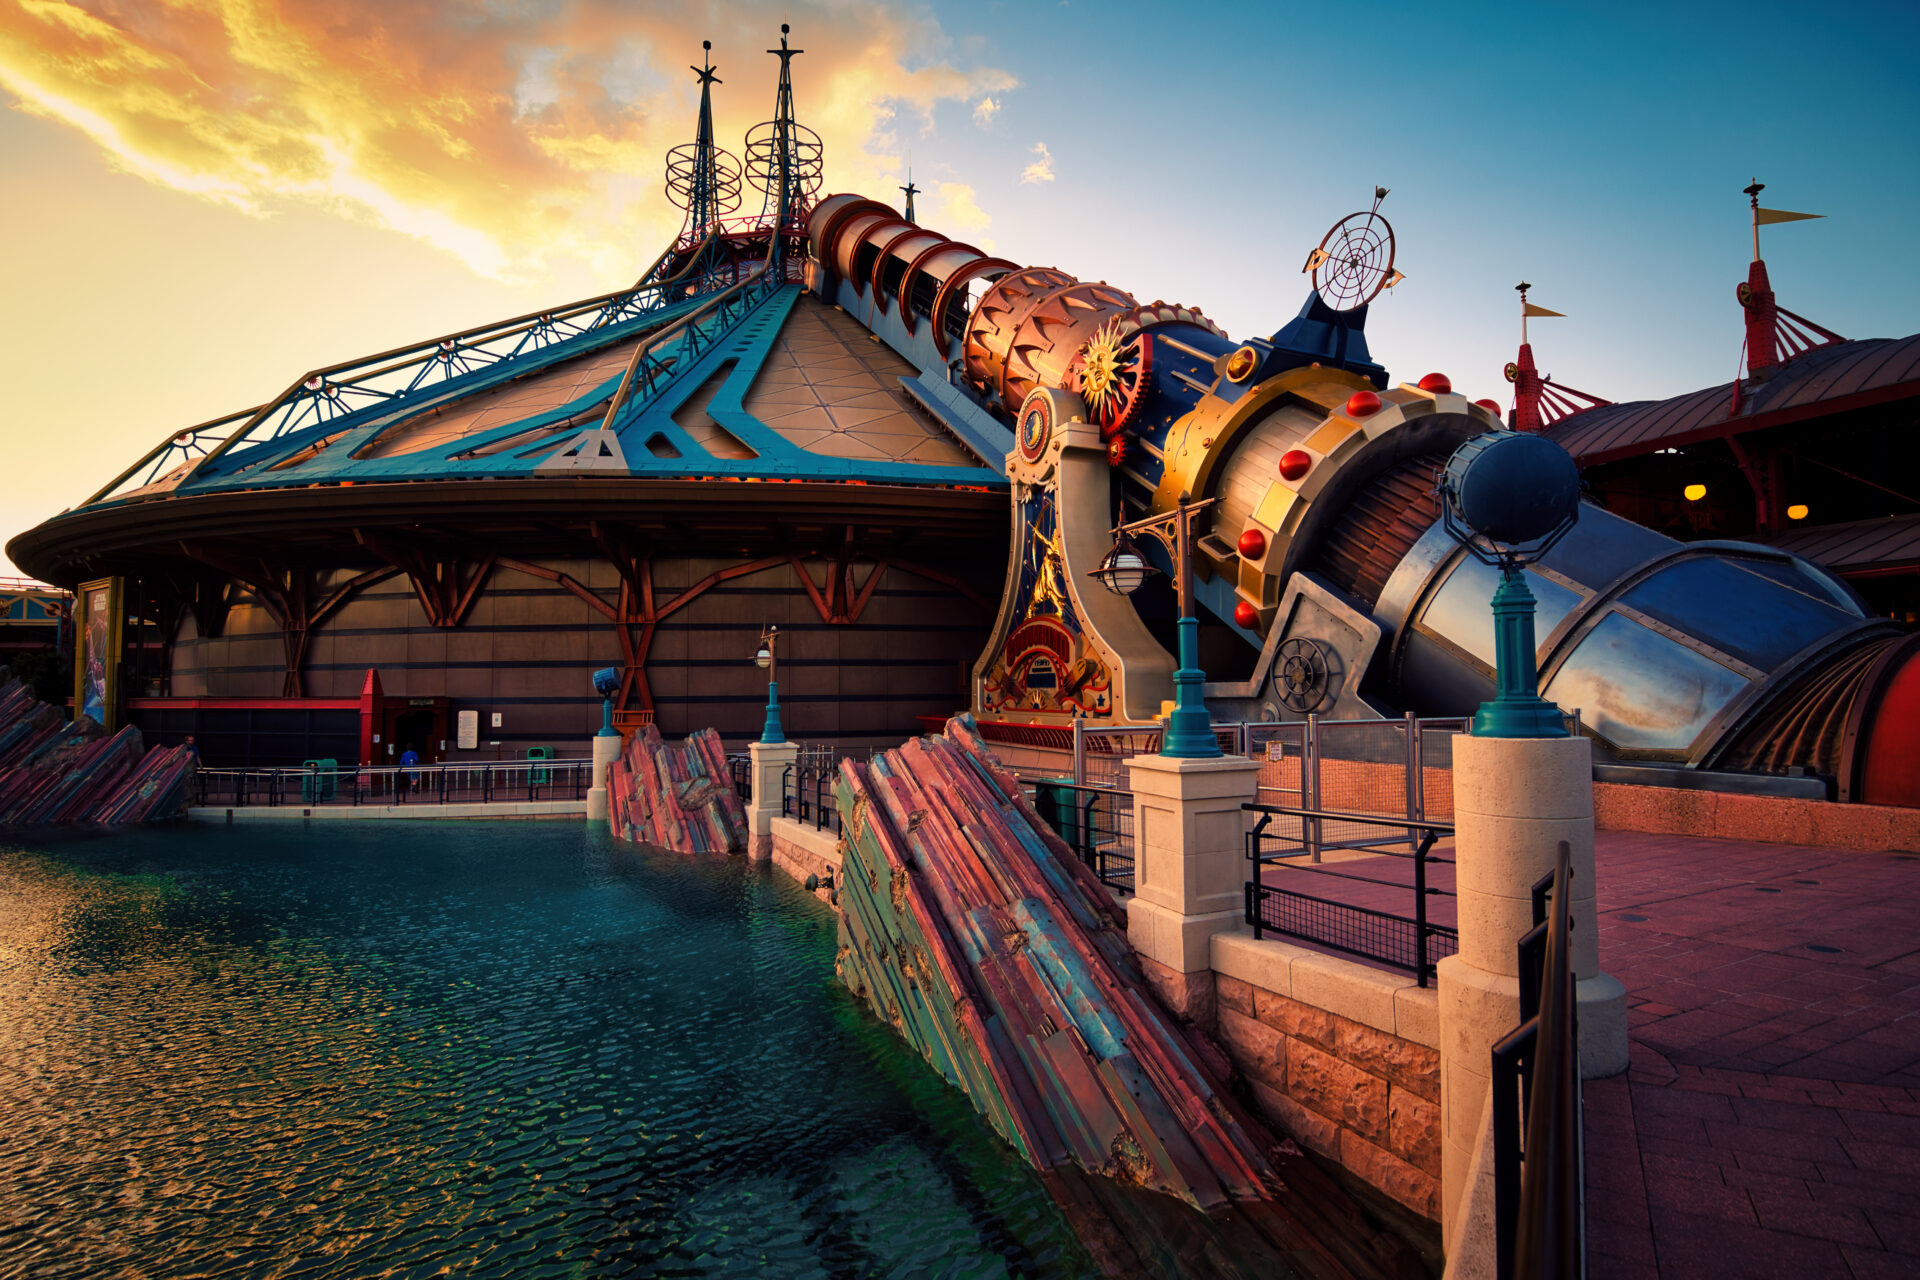 Space Mountain Disneyland Paris Hyper Sunset Discoveryland Canon Jules Verne From the Earth to the Moon Steampunk